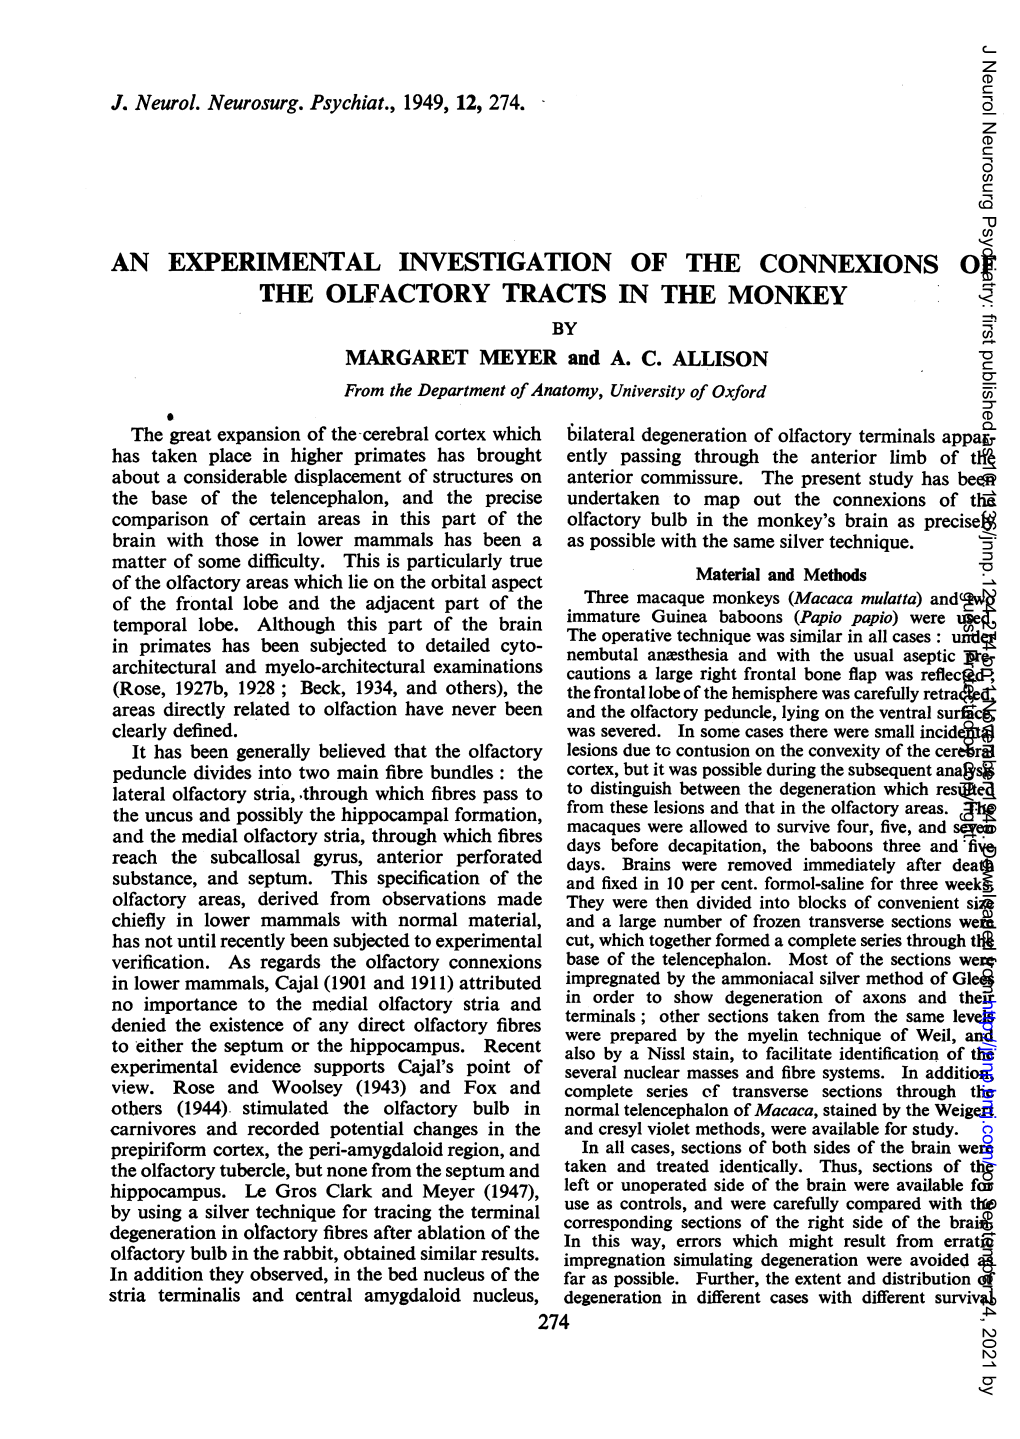 AN EXPERIMENTAL INVESTIGATION of the CONNEXIONS of the OLFACTORY TRACTS in the MONKEY by MARGARET MEYER and A